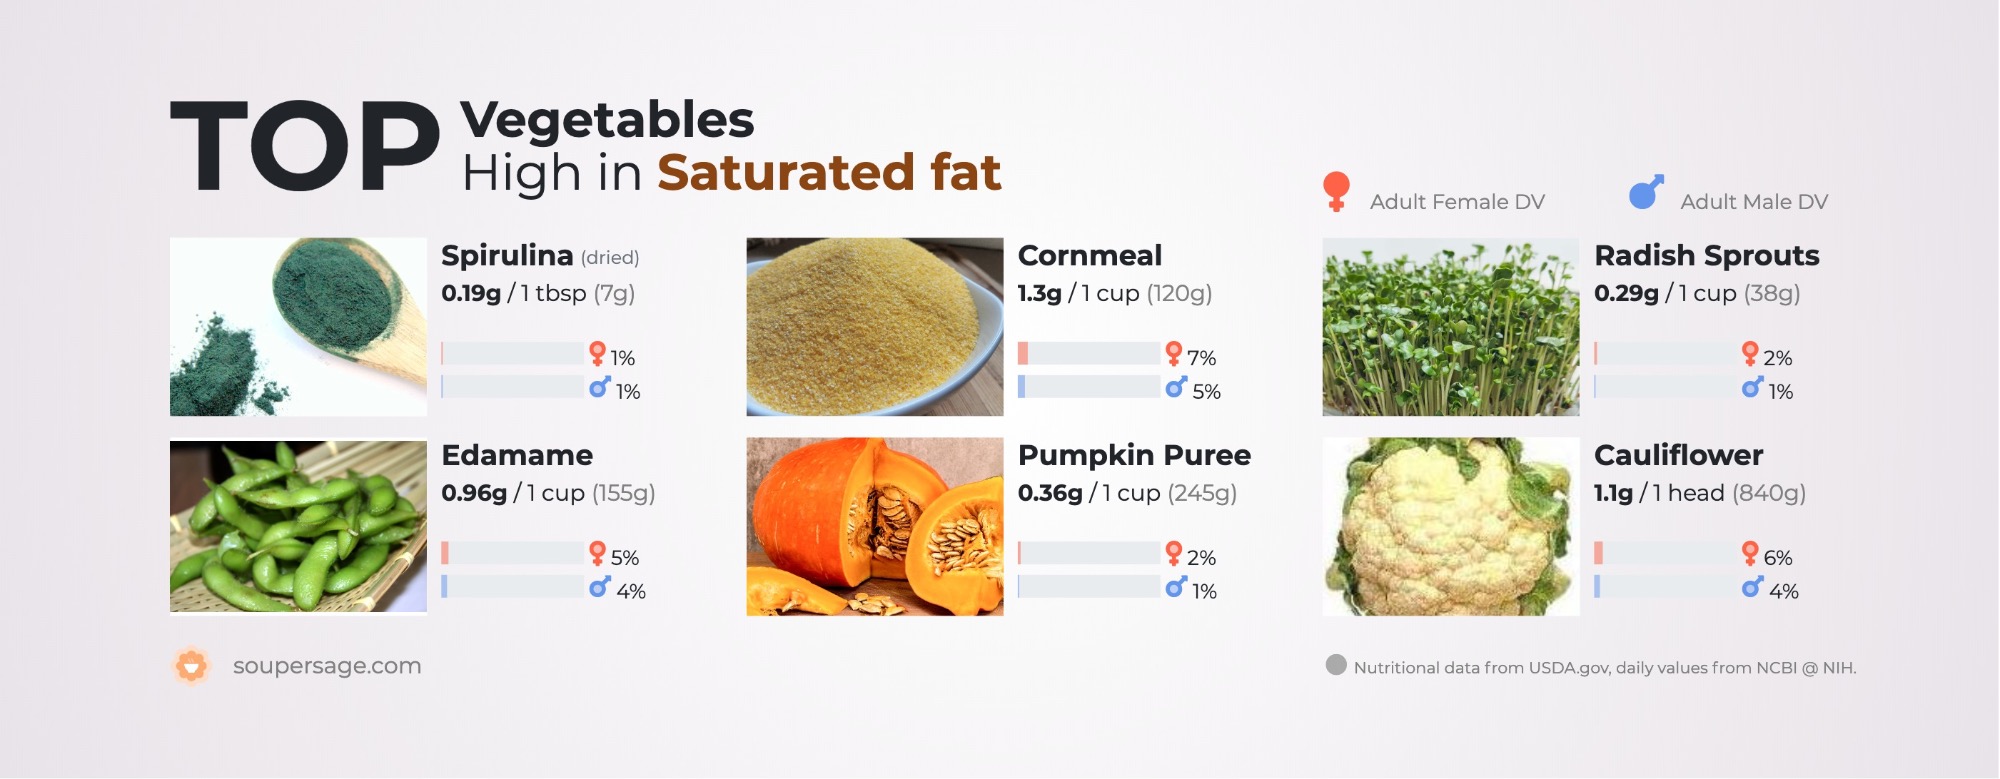 image of Top Vegetables High in Saturated fat